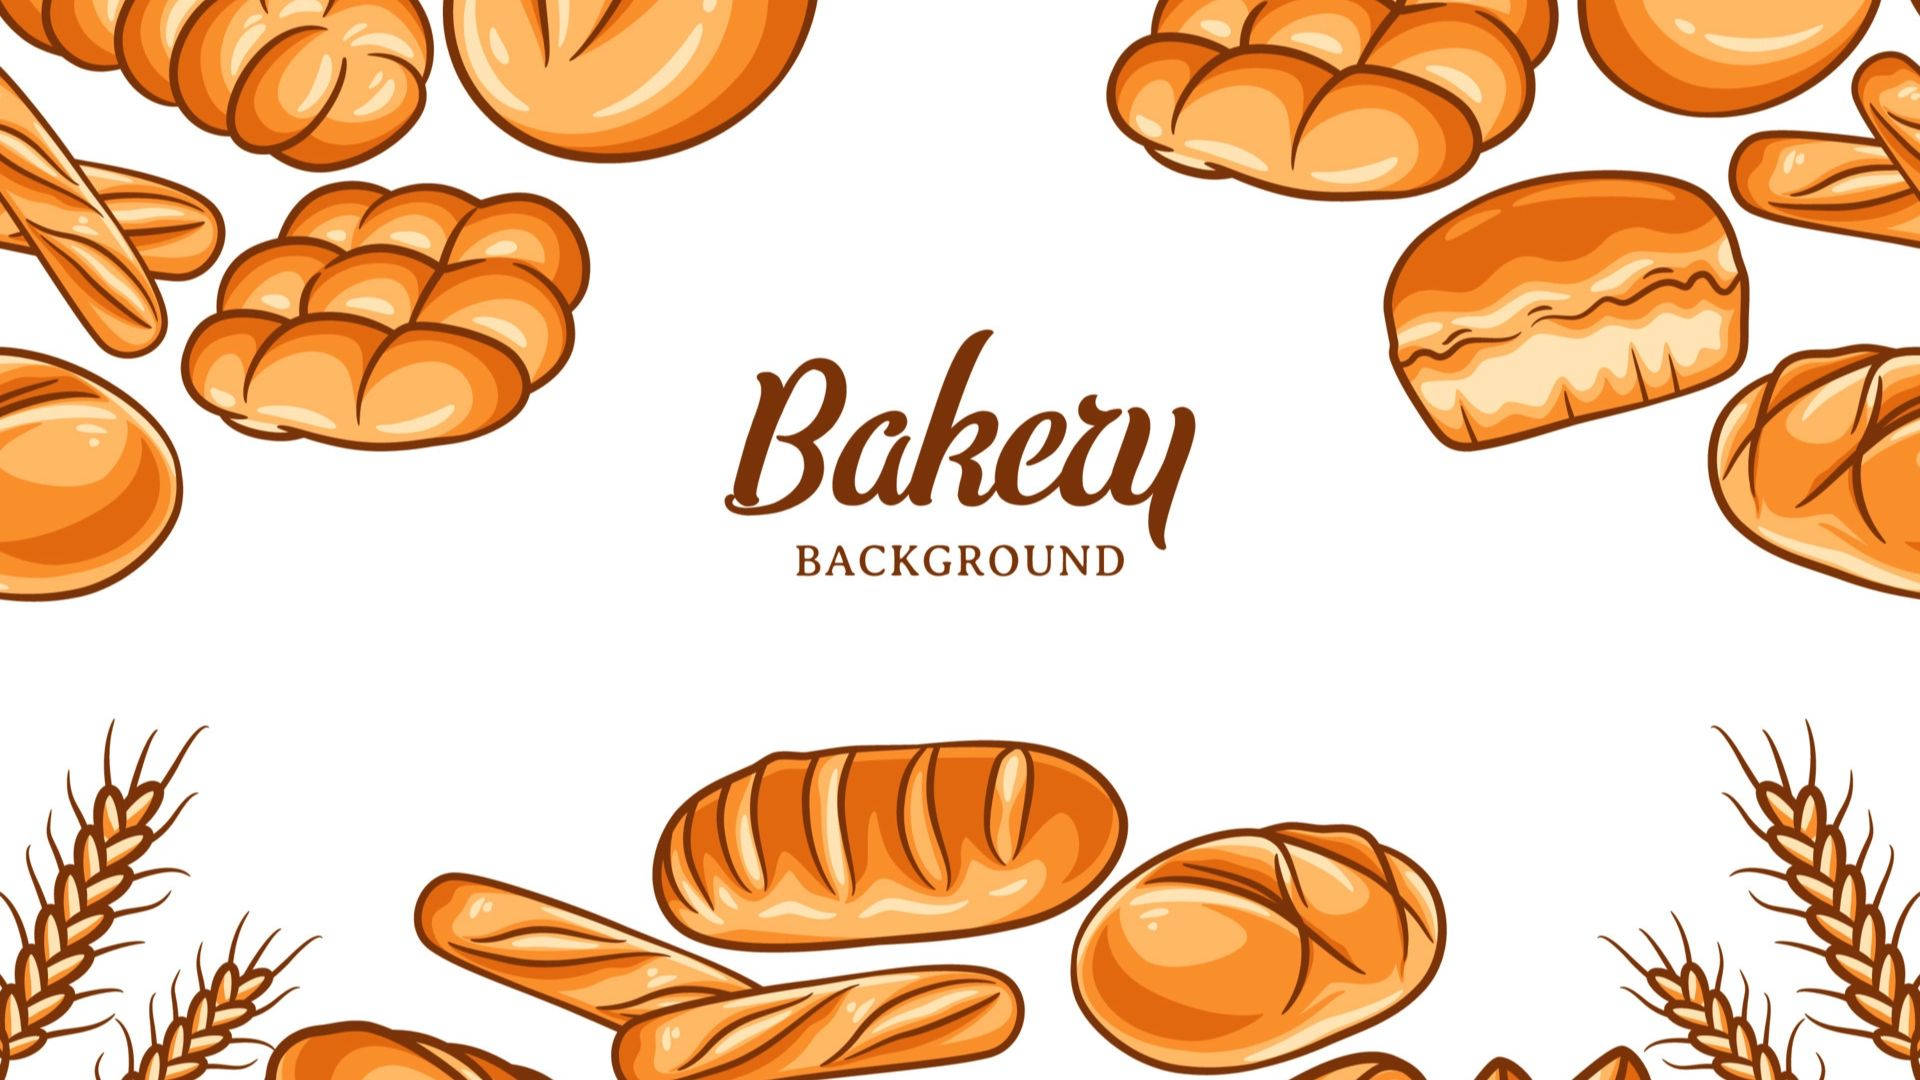 Bakery Background With Breads Background